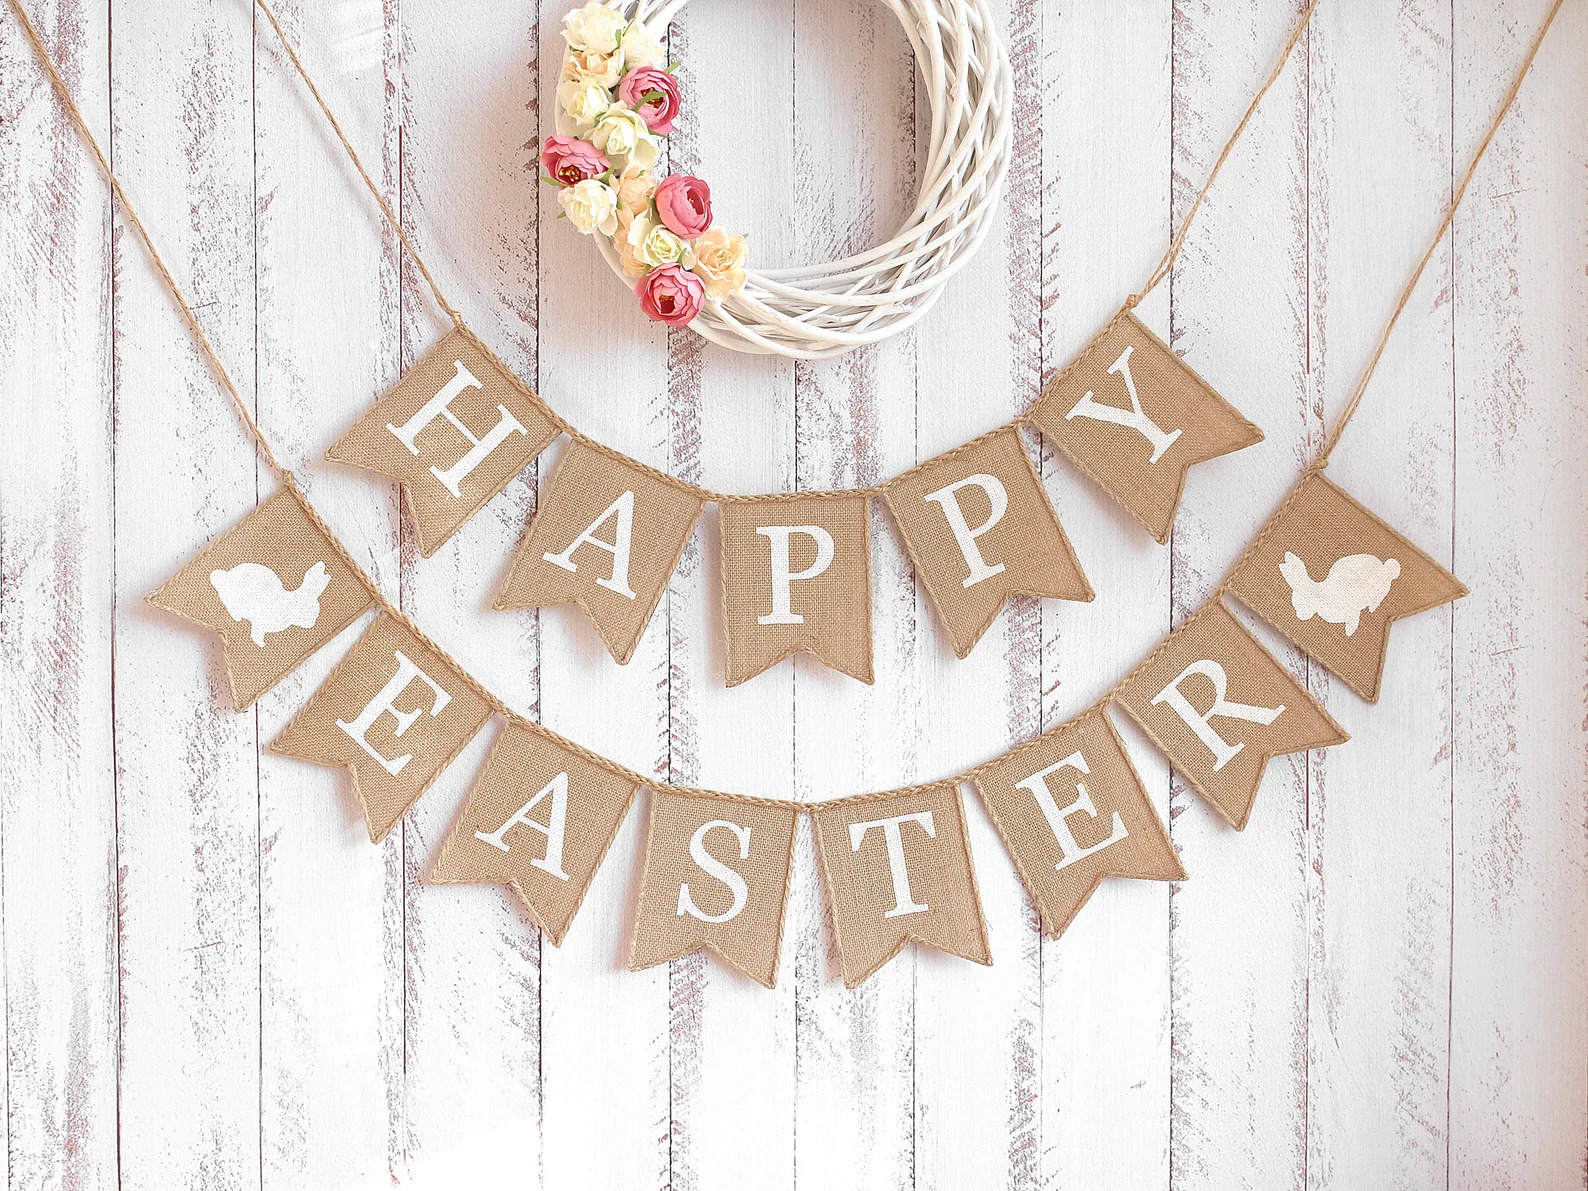 15 Inspiring Easter Banner Designs to Get You in the Spirit